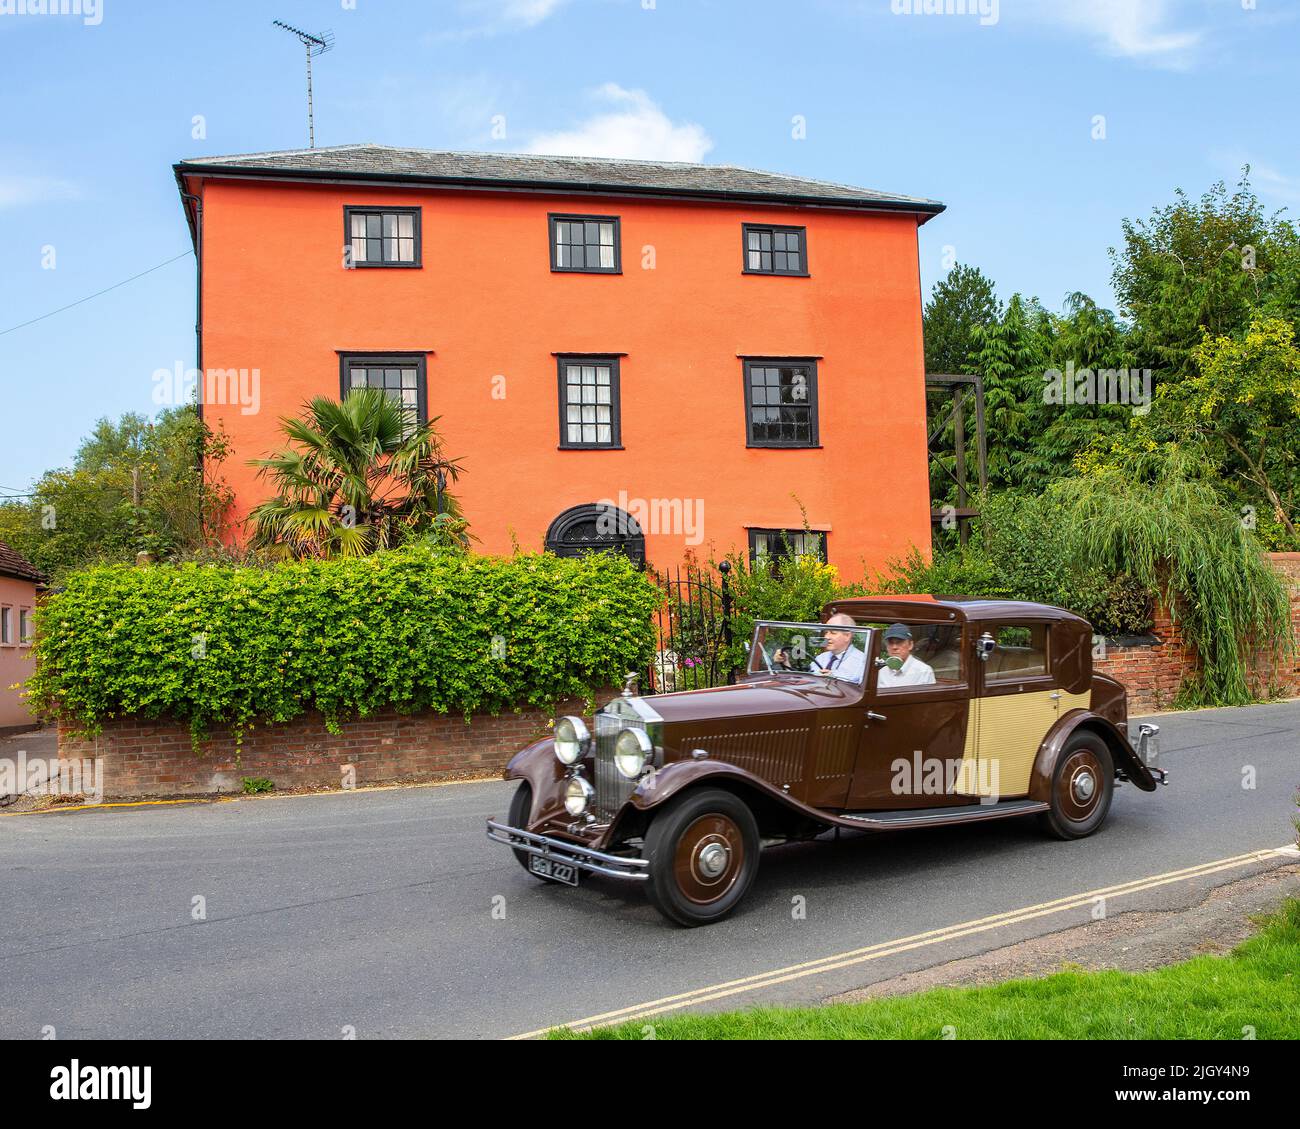 Essex, UK - September 6th 2021: A vintage car travelling through the beautiful village of Finchingfield in Essex, UK. Stock Photo